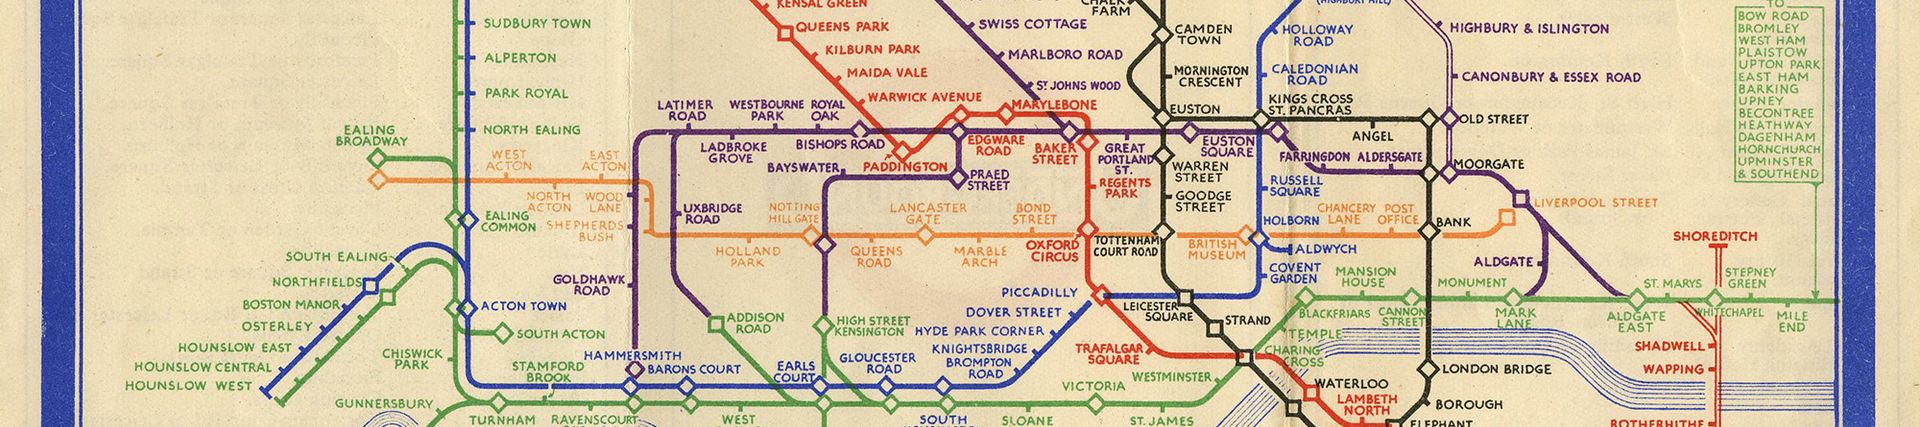 AN early version of the Underground map as designed by Harry Beck